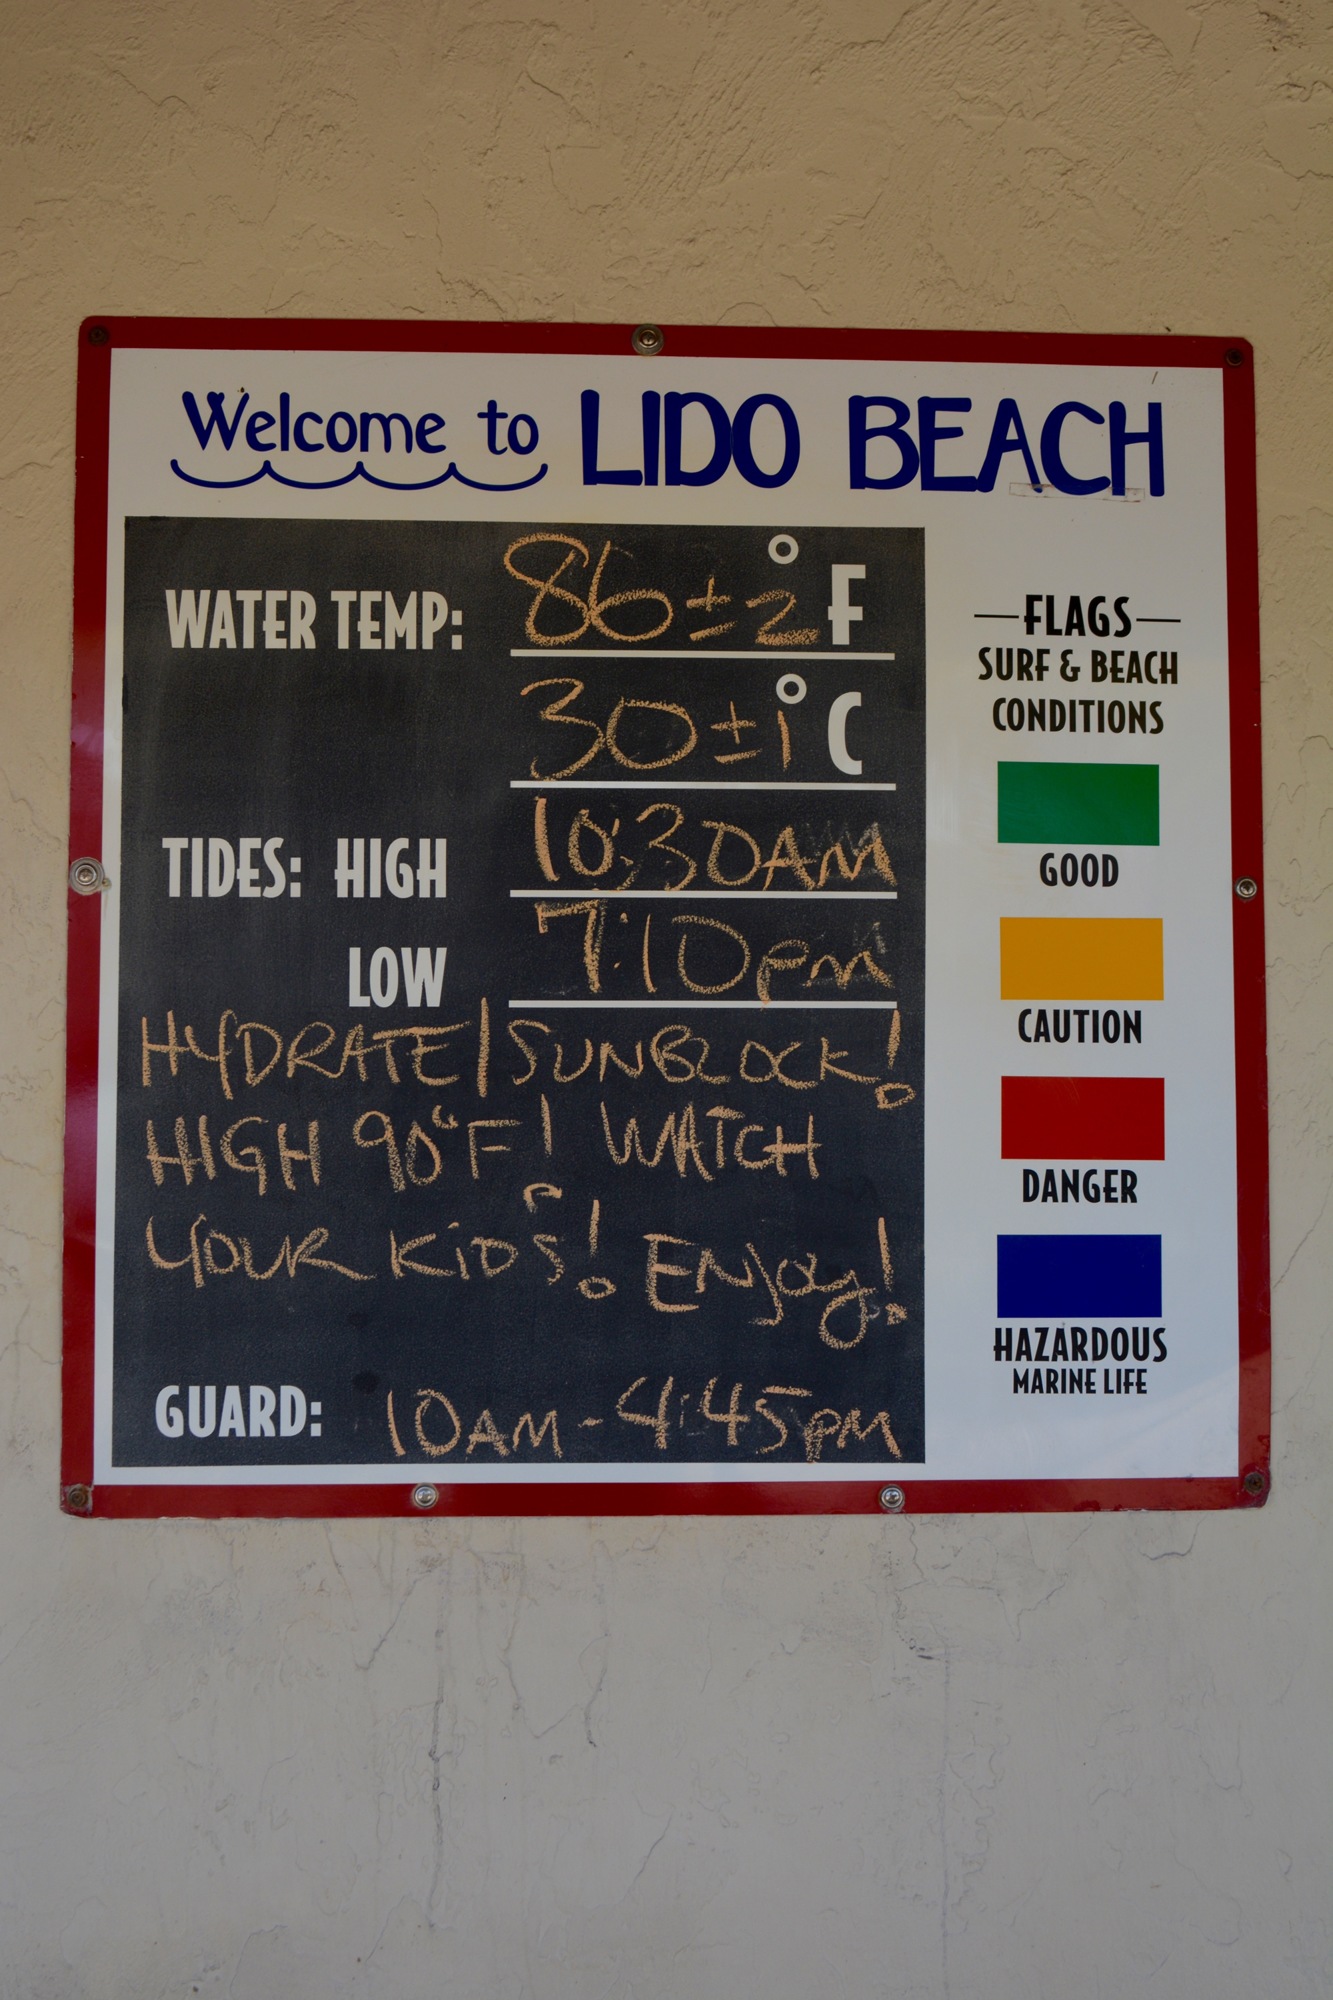 Storyboards, like this one at Lido Beach, educate visitors about weather status, flags, the tides and more